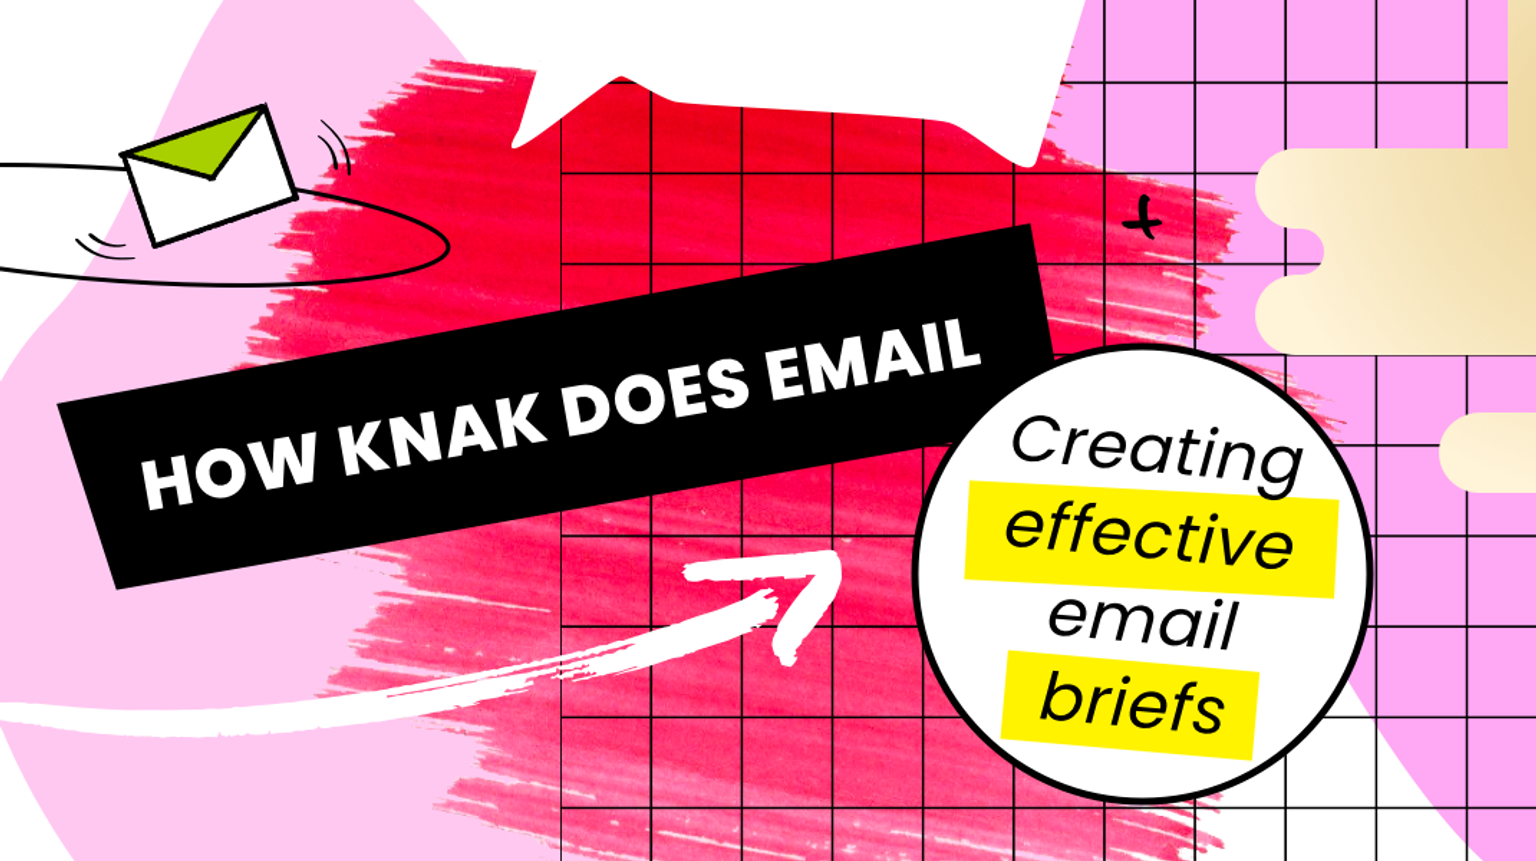 Creating Effective Email Briefs